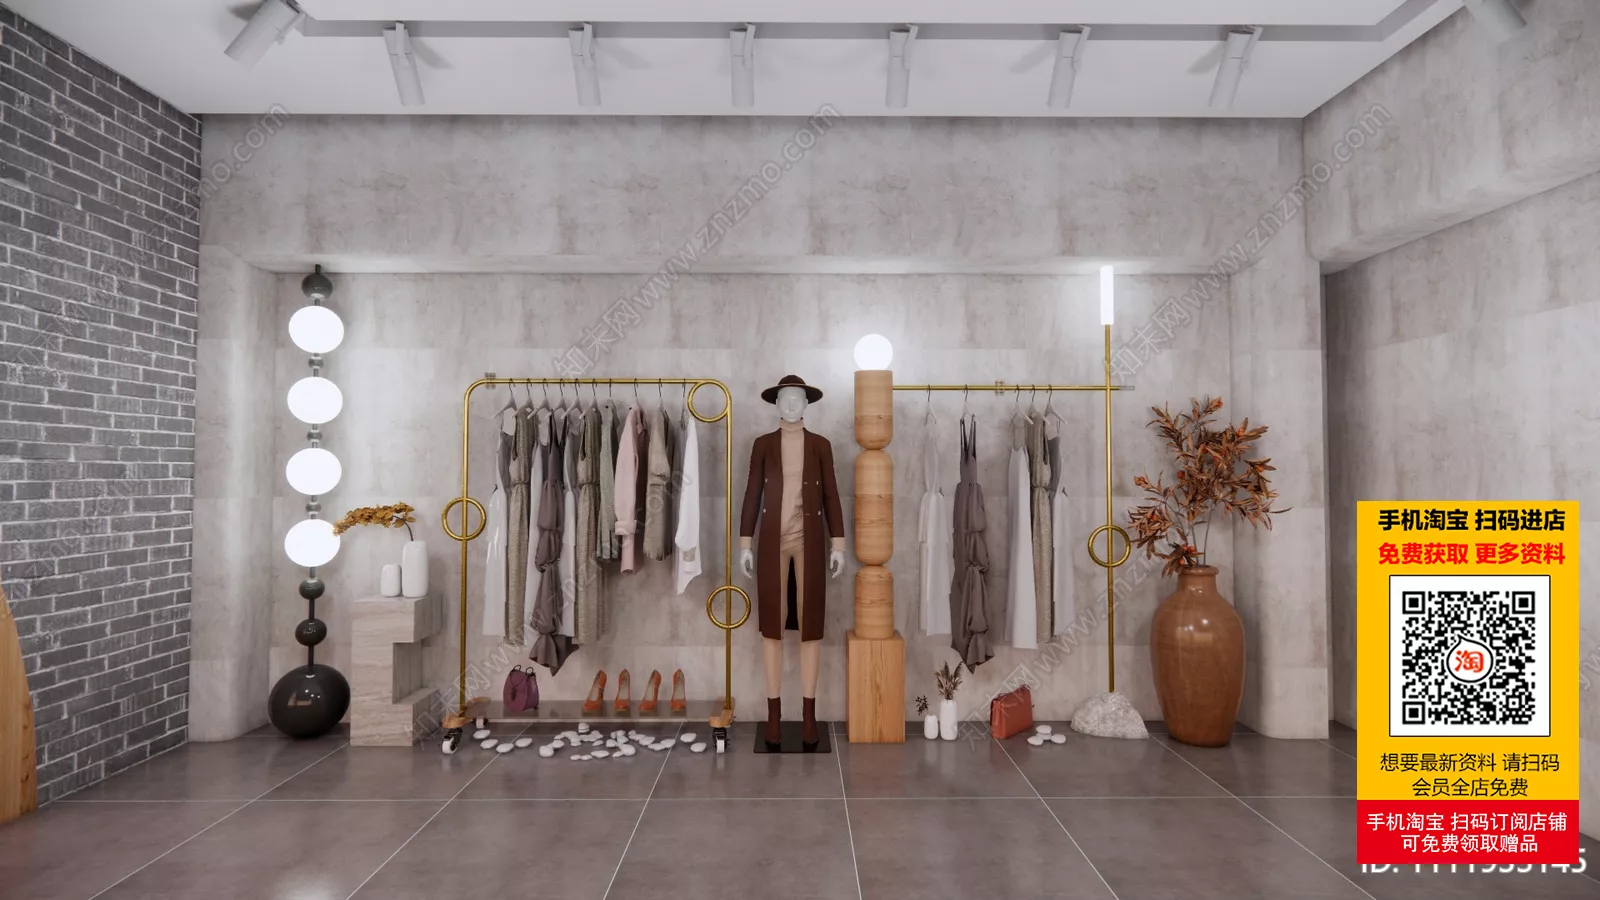 WABI SABI CLOTHING STORE - SKETCHUP 3D SCENE - VRAY OR ENSCAPE - ID17601